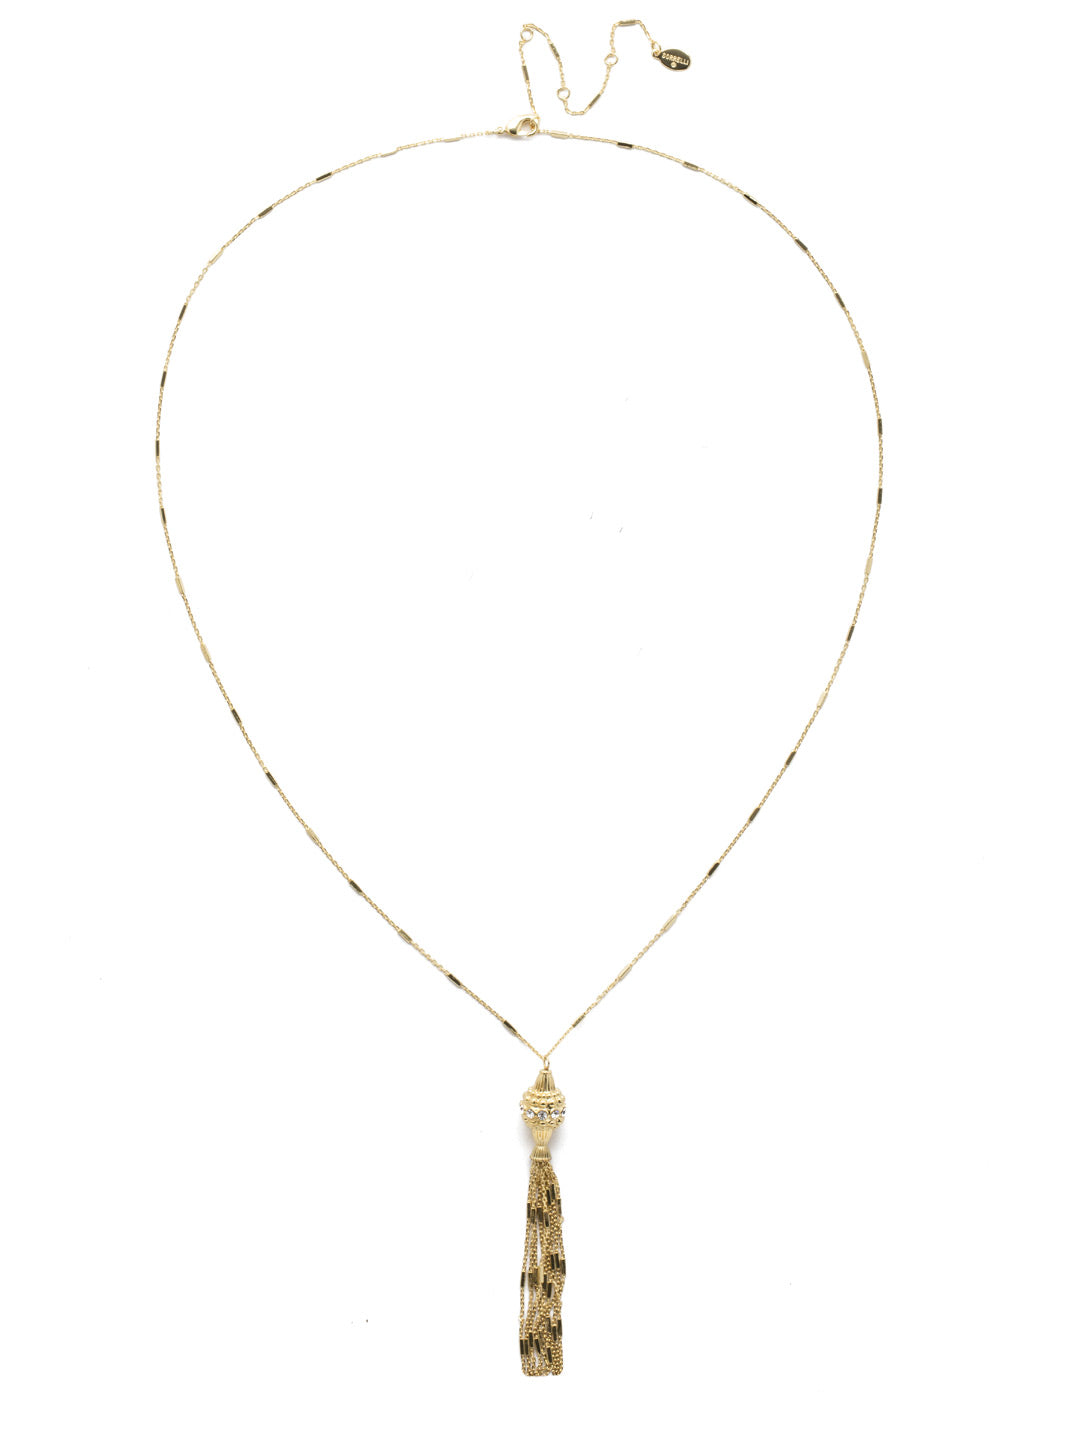 Floriana Long Strand Necklace - NEA39BGPLP - <p>Swirling metal filagree and open oval elements make this long strand necklace a true treasure. Perfectly placed crystals and a finishing tassel complete the design. From Sorrelli's Polished Pearl collection in our Bright Gold-tone finish.</p>